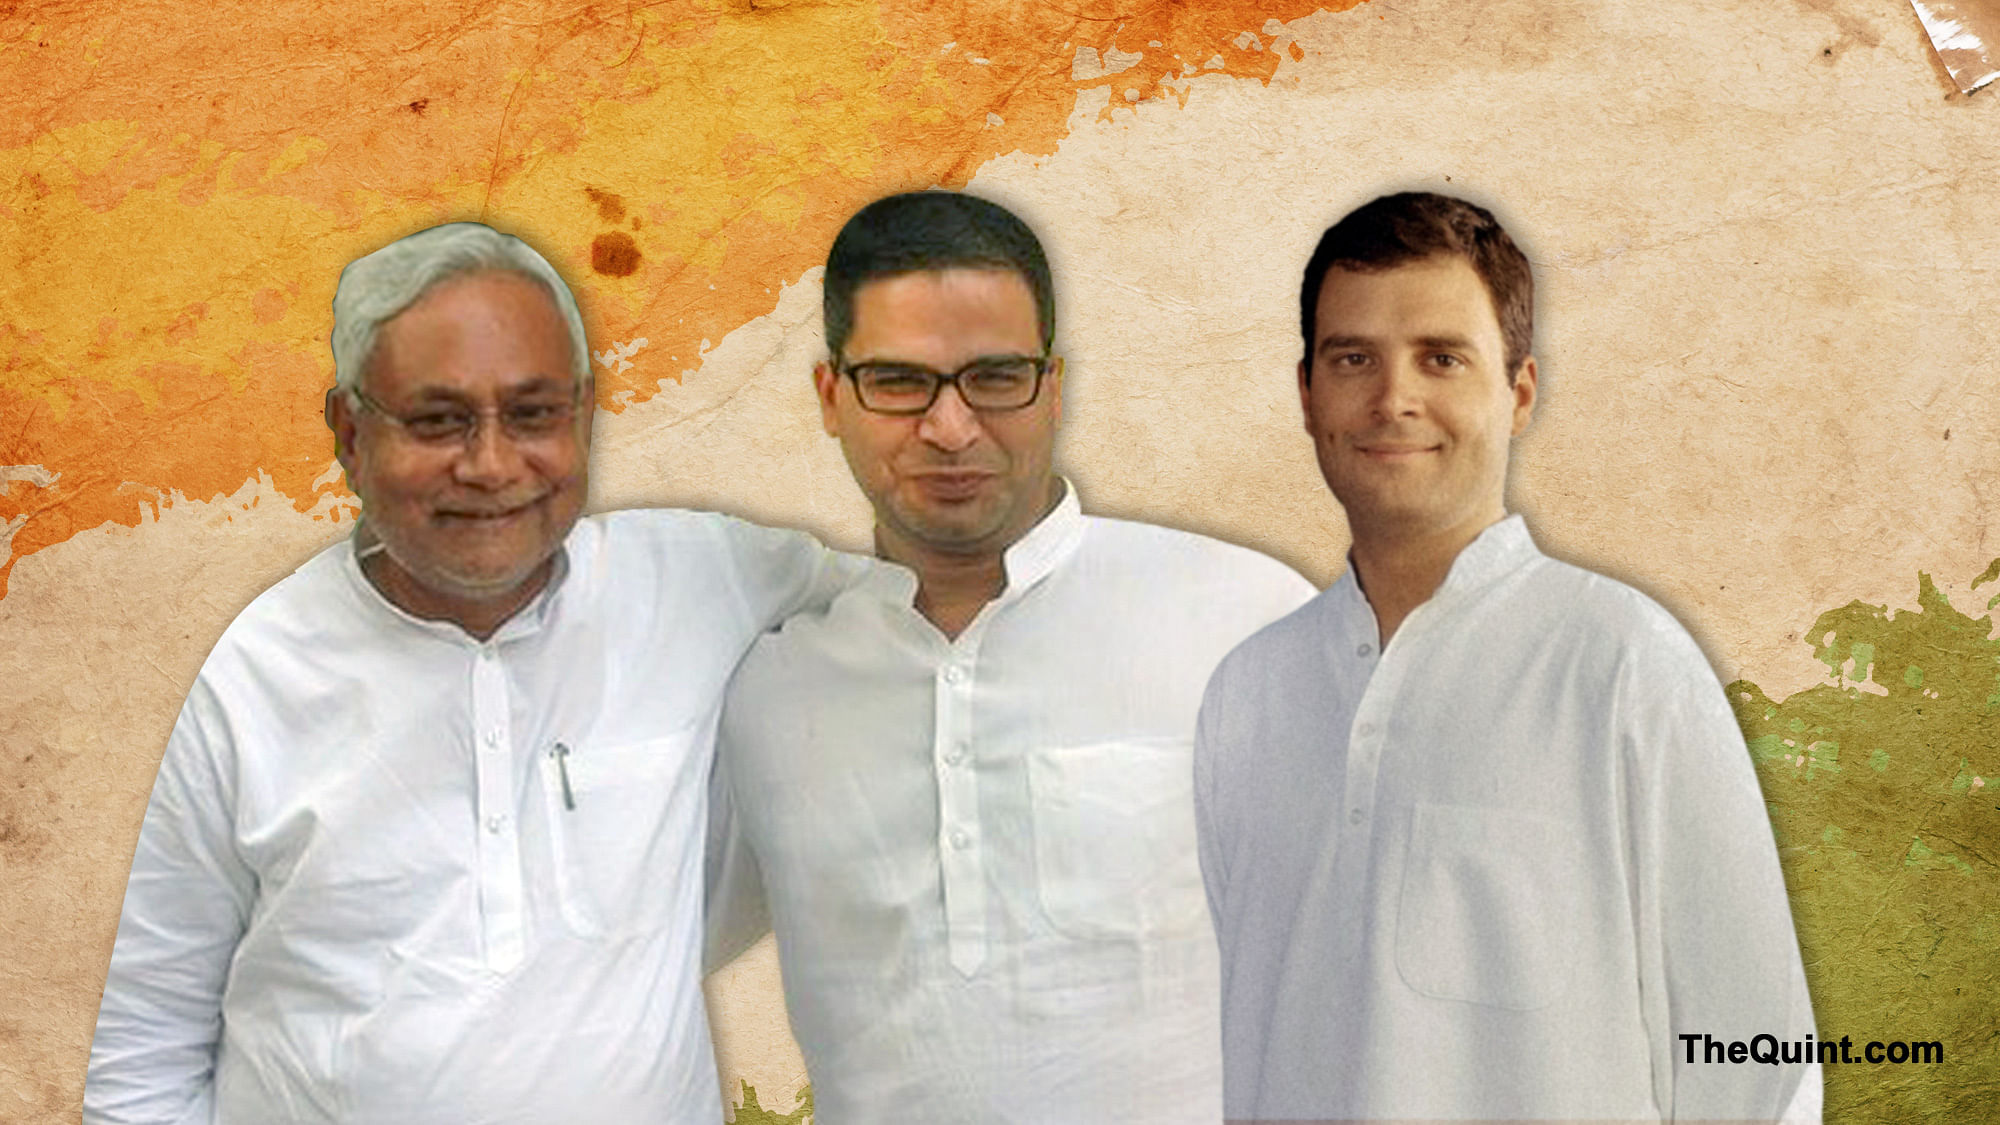 

Congress master strategist, Prashant Kishor has his task cut out clearly, creating a synergy between Nitish and Rahul Gandhi ahead of UP polls in 2017. (Photo: <b>The Quint</b>)